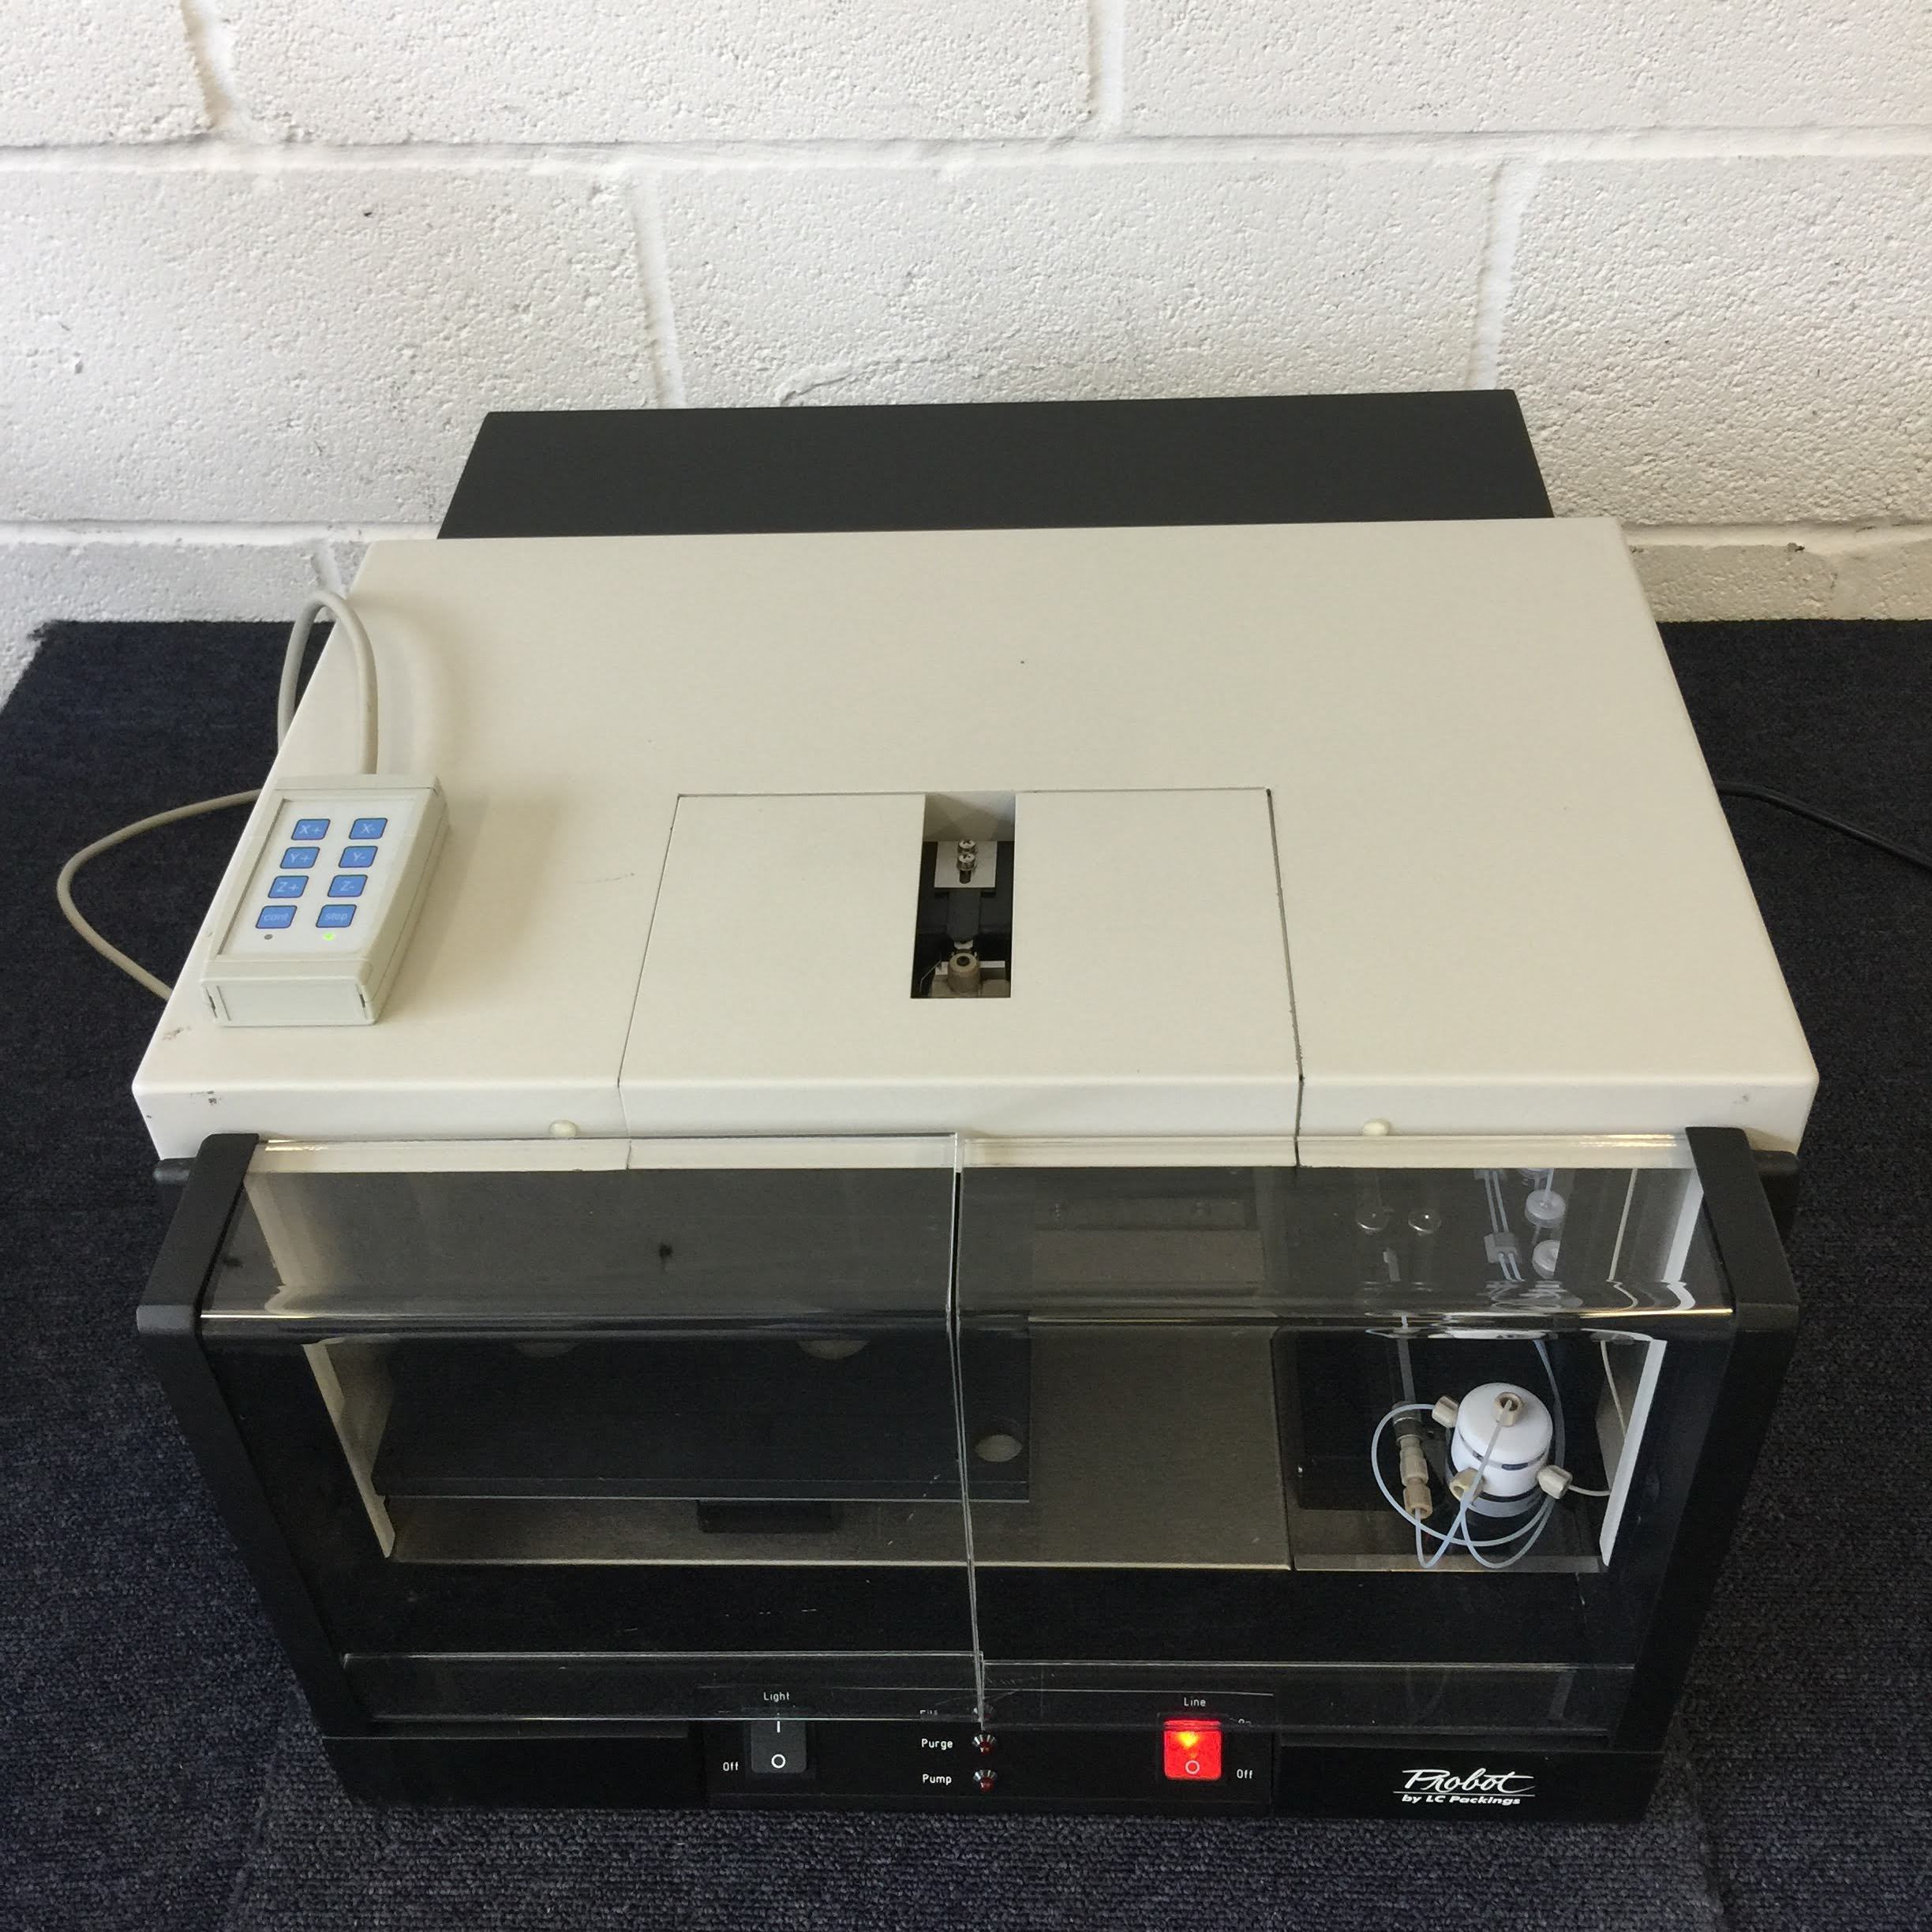 dionex probot micro fraction collector with dosage unit